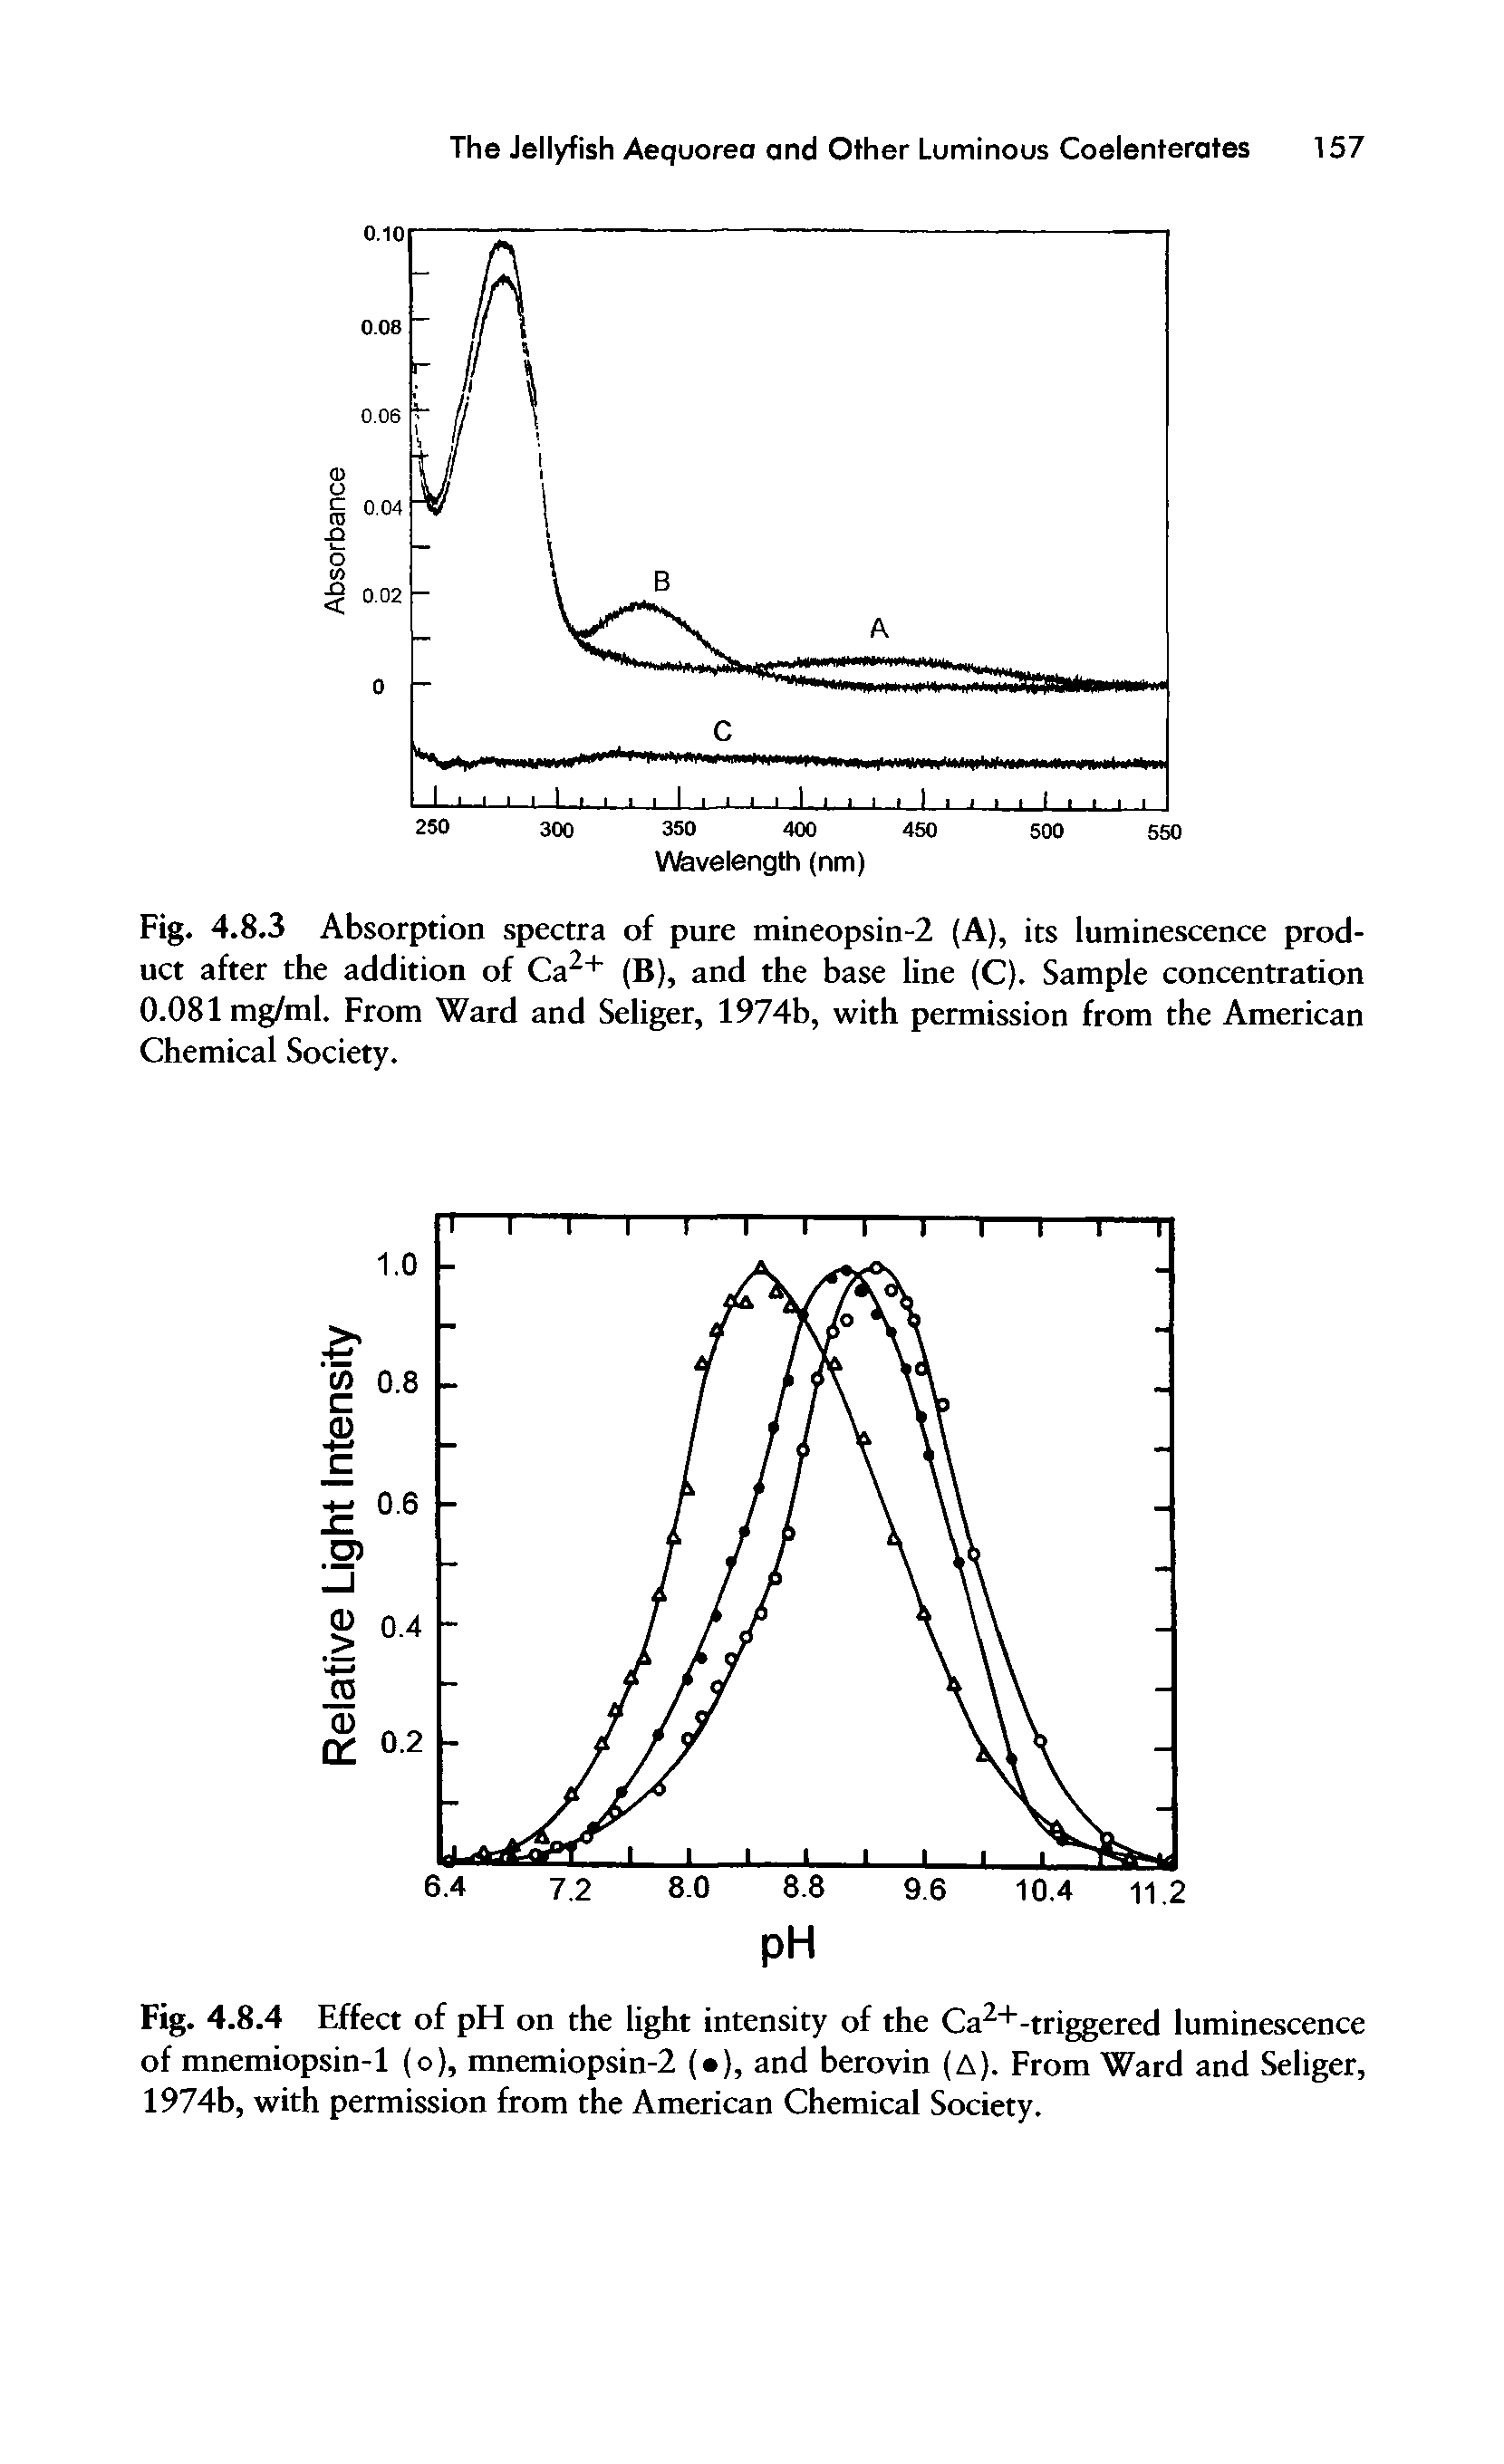 Fig. 4.8.4 Effect of pH on the light intensity of the Ca2+-triggered luminescence of mnemiopsin-1 (o), mnemiopsin-2 ( ), and berovin (A). From Ward and Seliger, 1974b, with permission from the American Chemical Society.